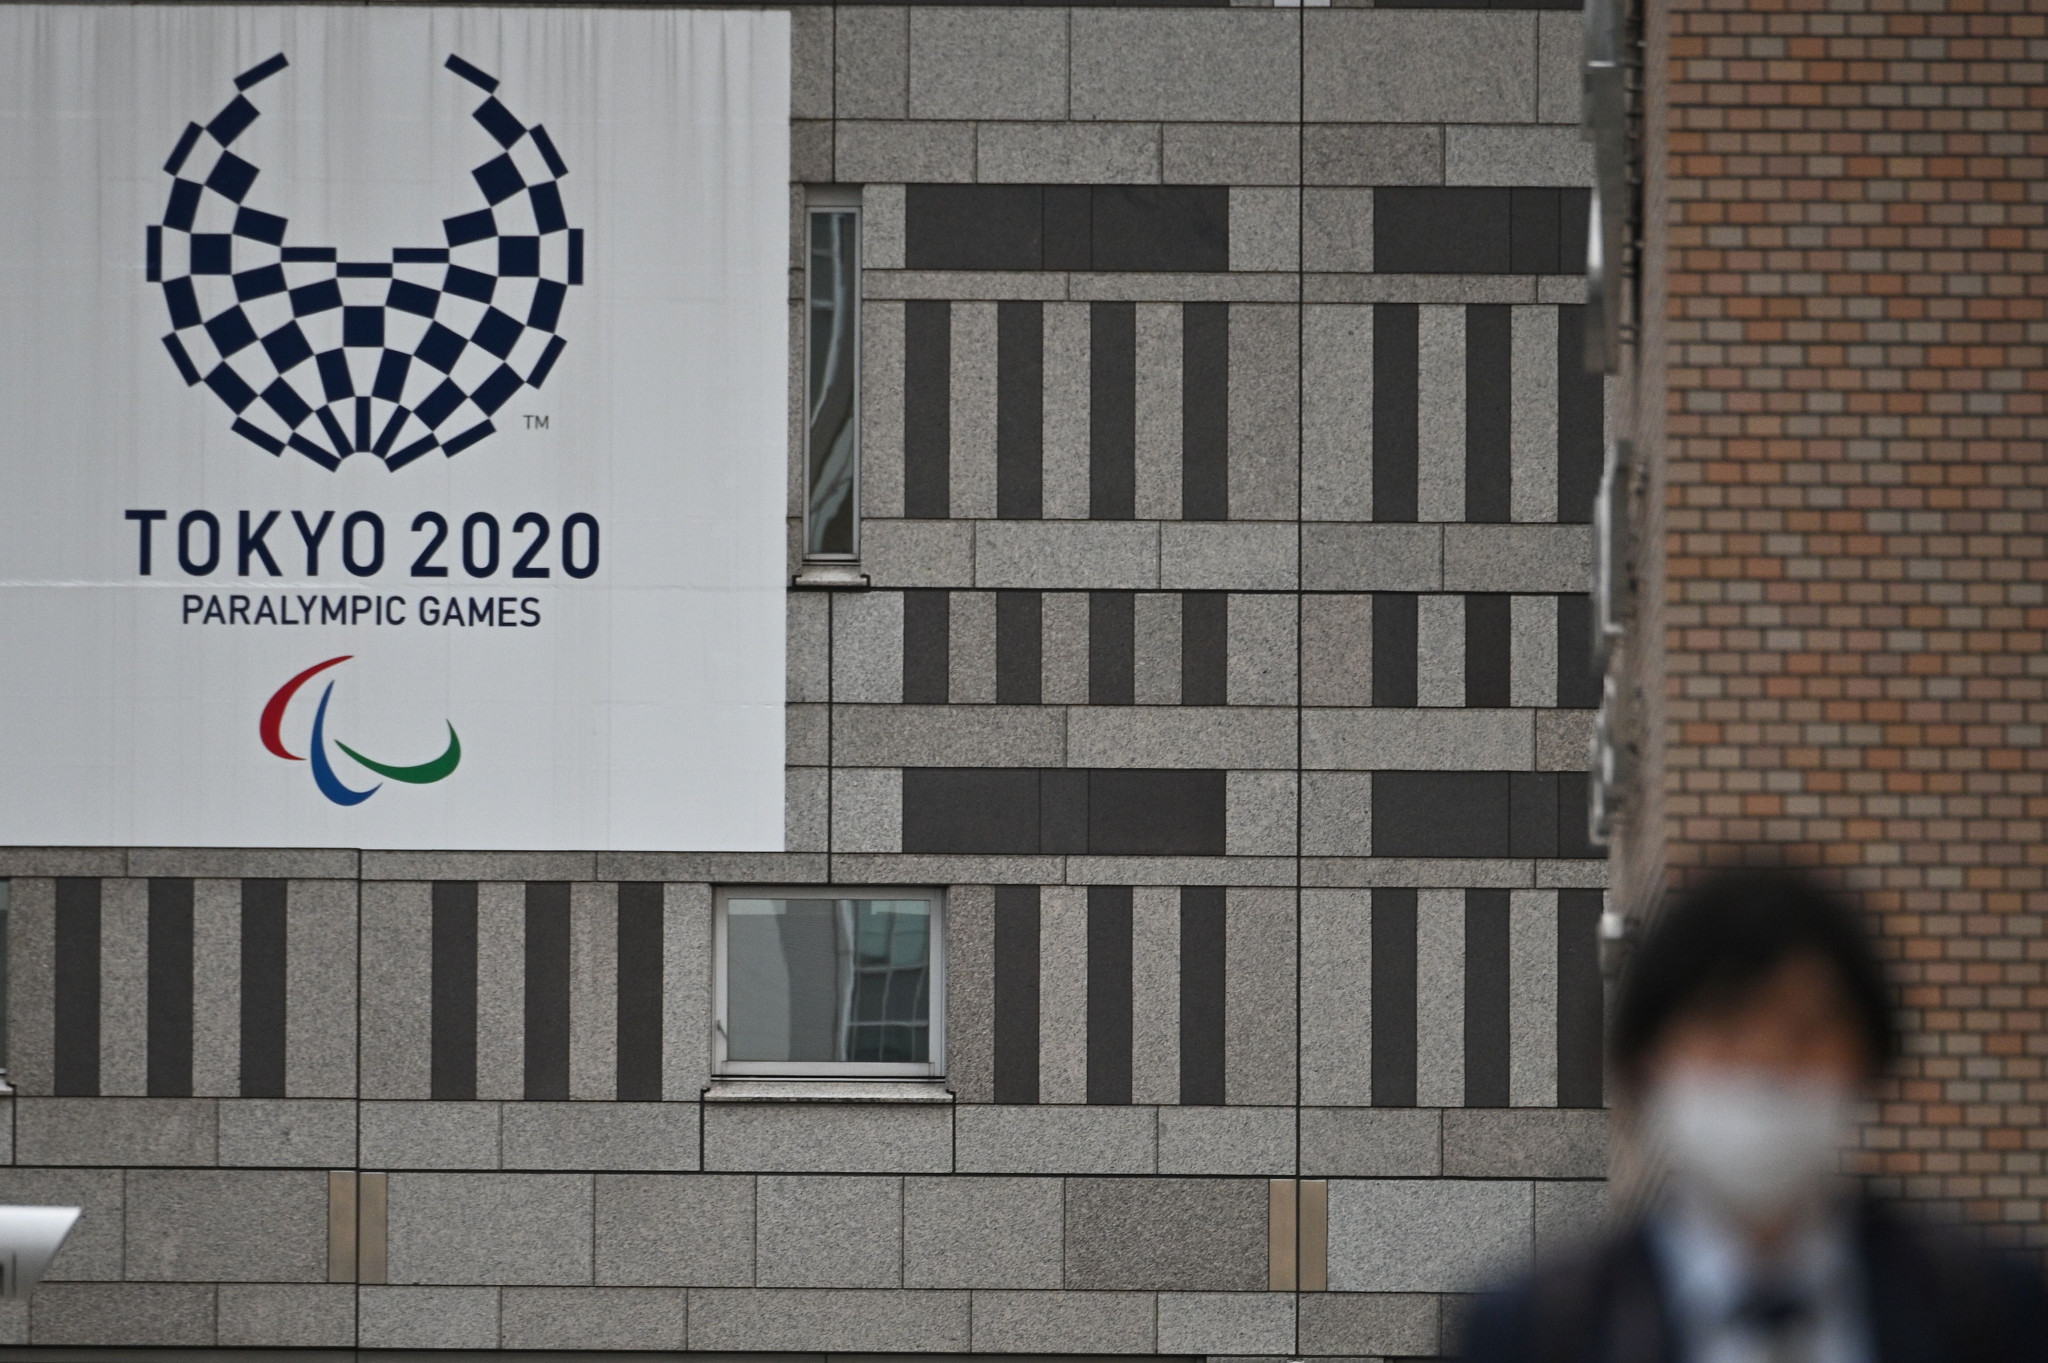 The postponement of the Tokyo 2020 Paralympics has left a void in the competition calendar ©Getty Images